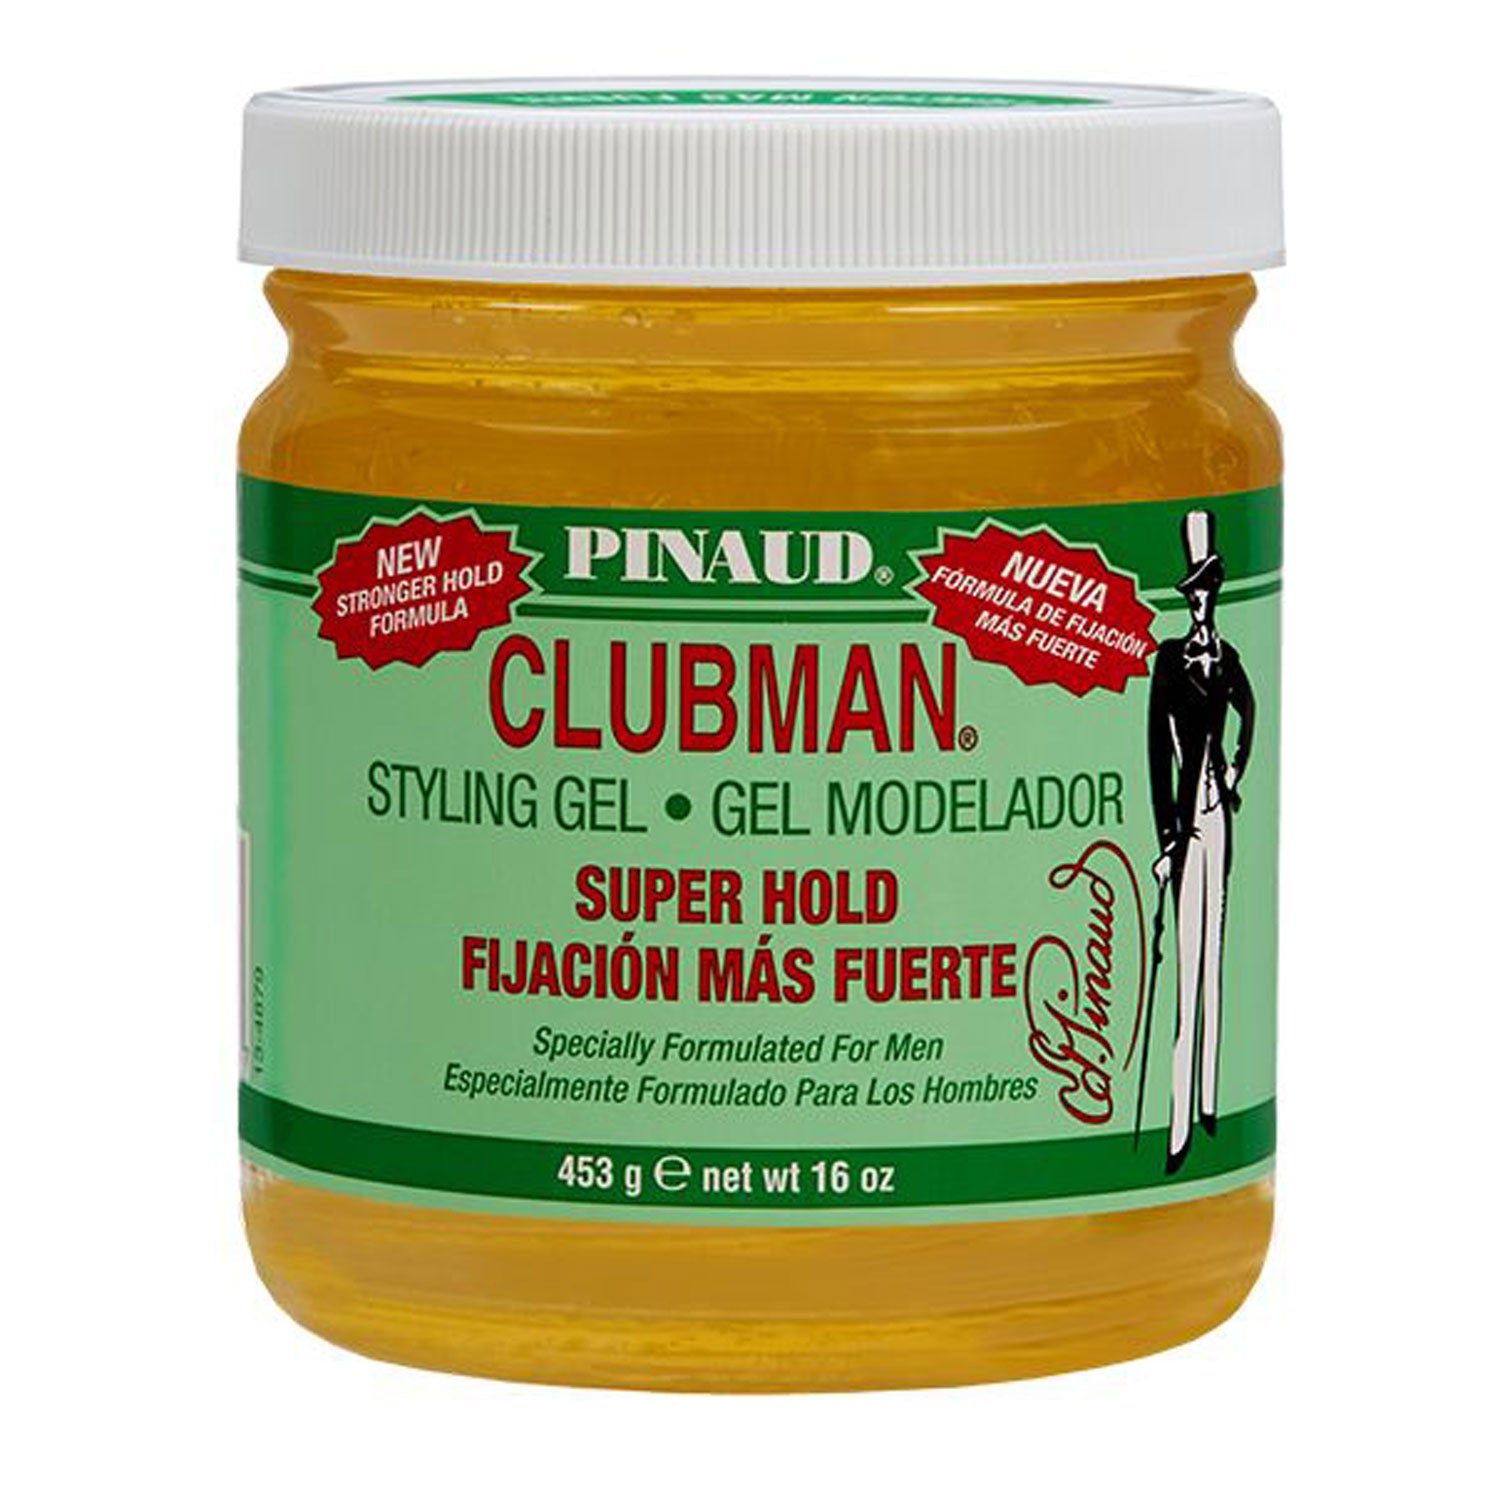 Clubman Superhold Styling Gel 453g - Orcadia